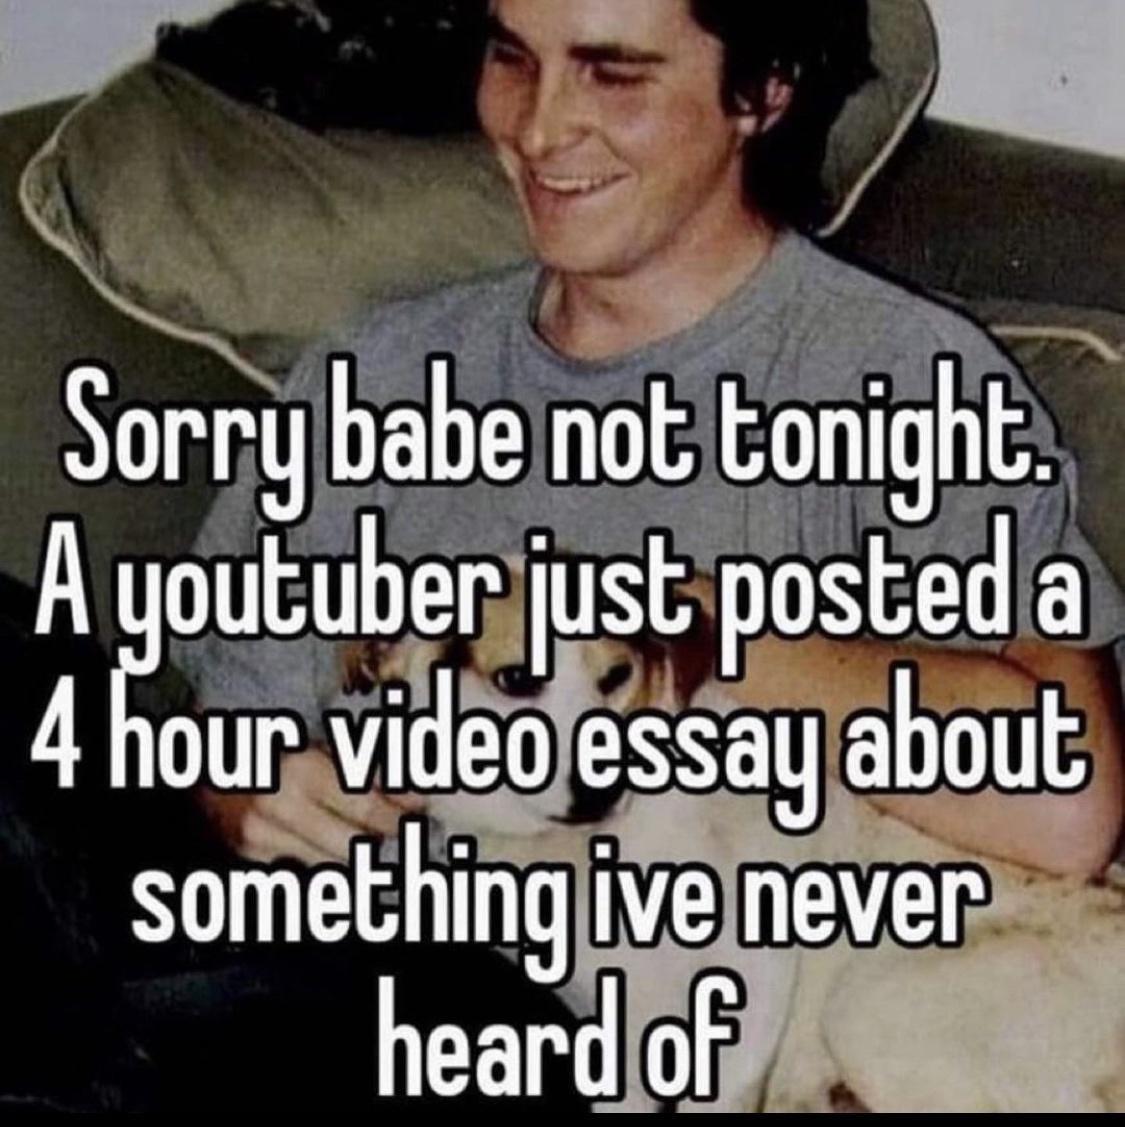 dank memes - photo caption - Sorry babe not tonight. A youtuber just posted a 4 hour video essay about something ive never heard of